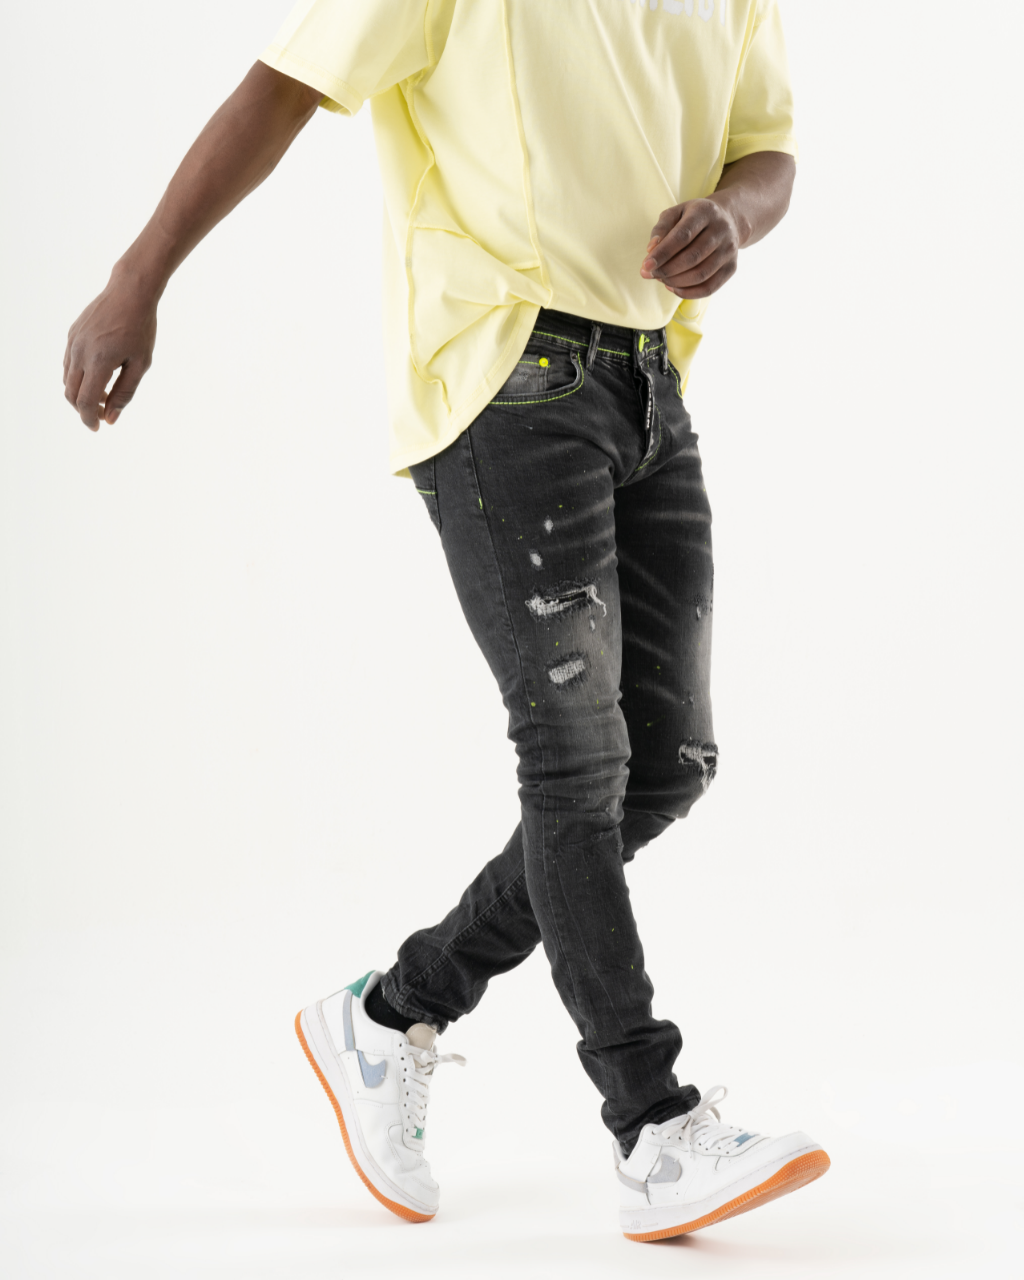 A man wearing INKLING skinny fit black jeans and a yellow t-shirt in mens streetwear style.